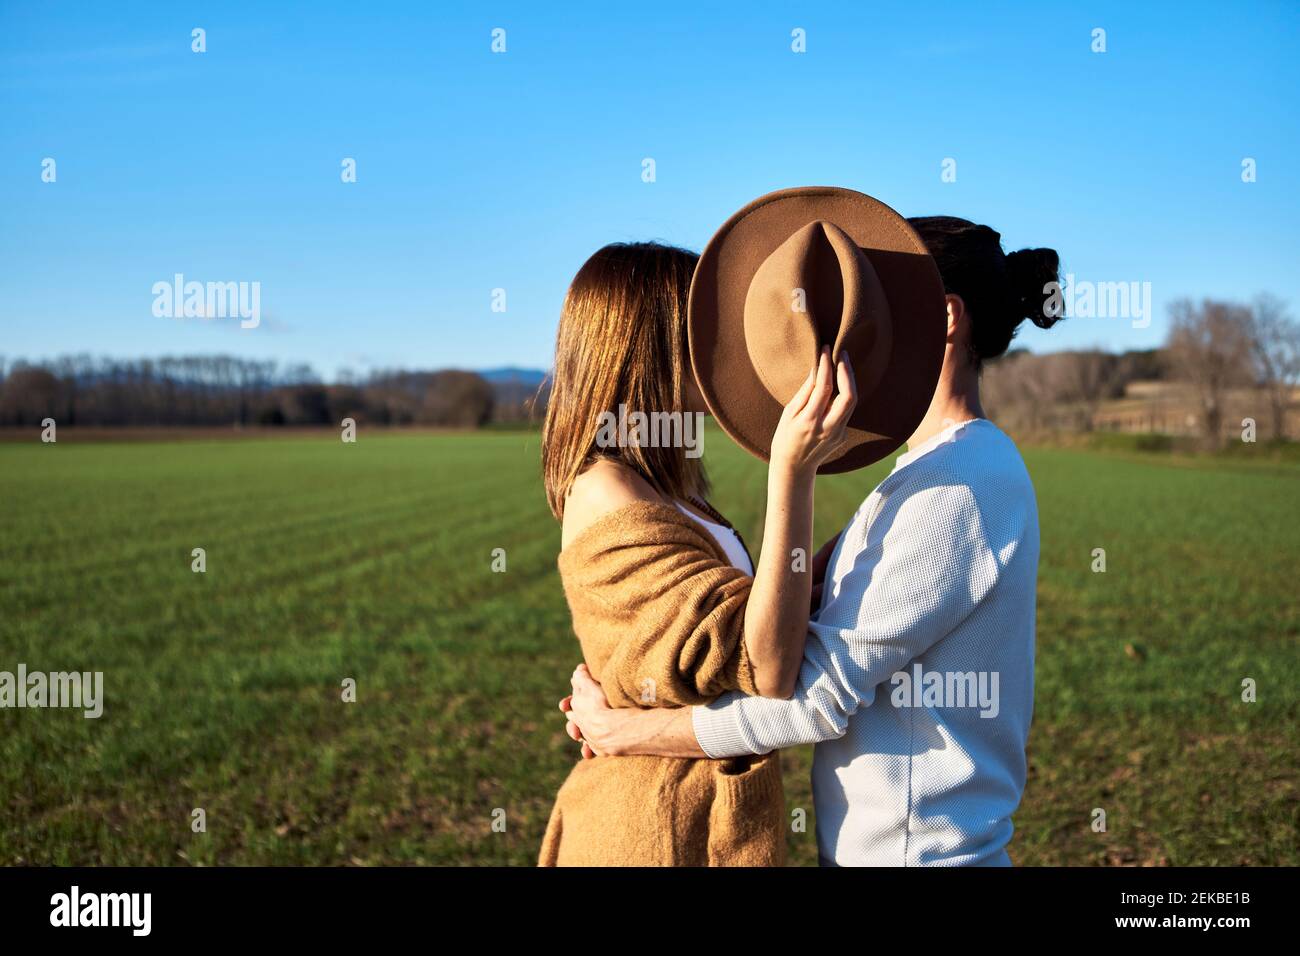 Heterosexual couple embracing while girlfriend covering faces with hat against clear blue sky Stock Photo